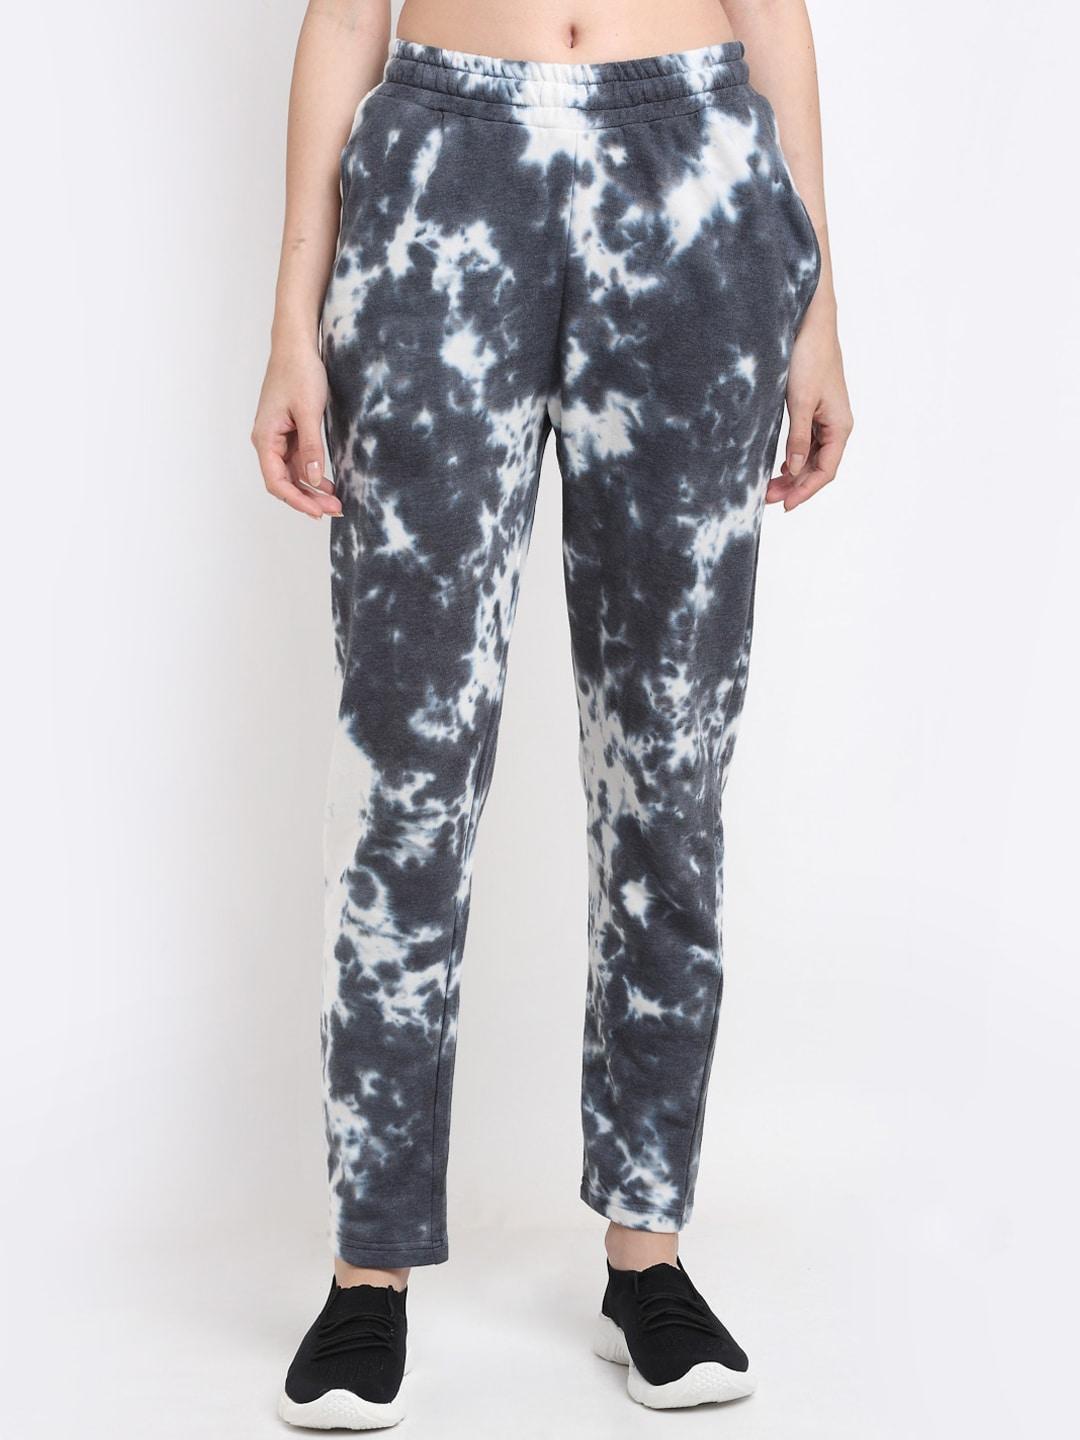 door74 women grey & white tie and dye relaxed fit track pants